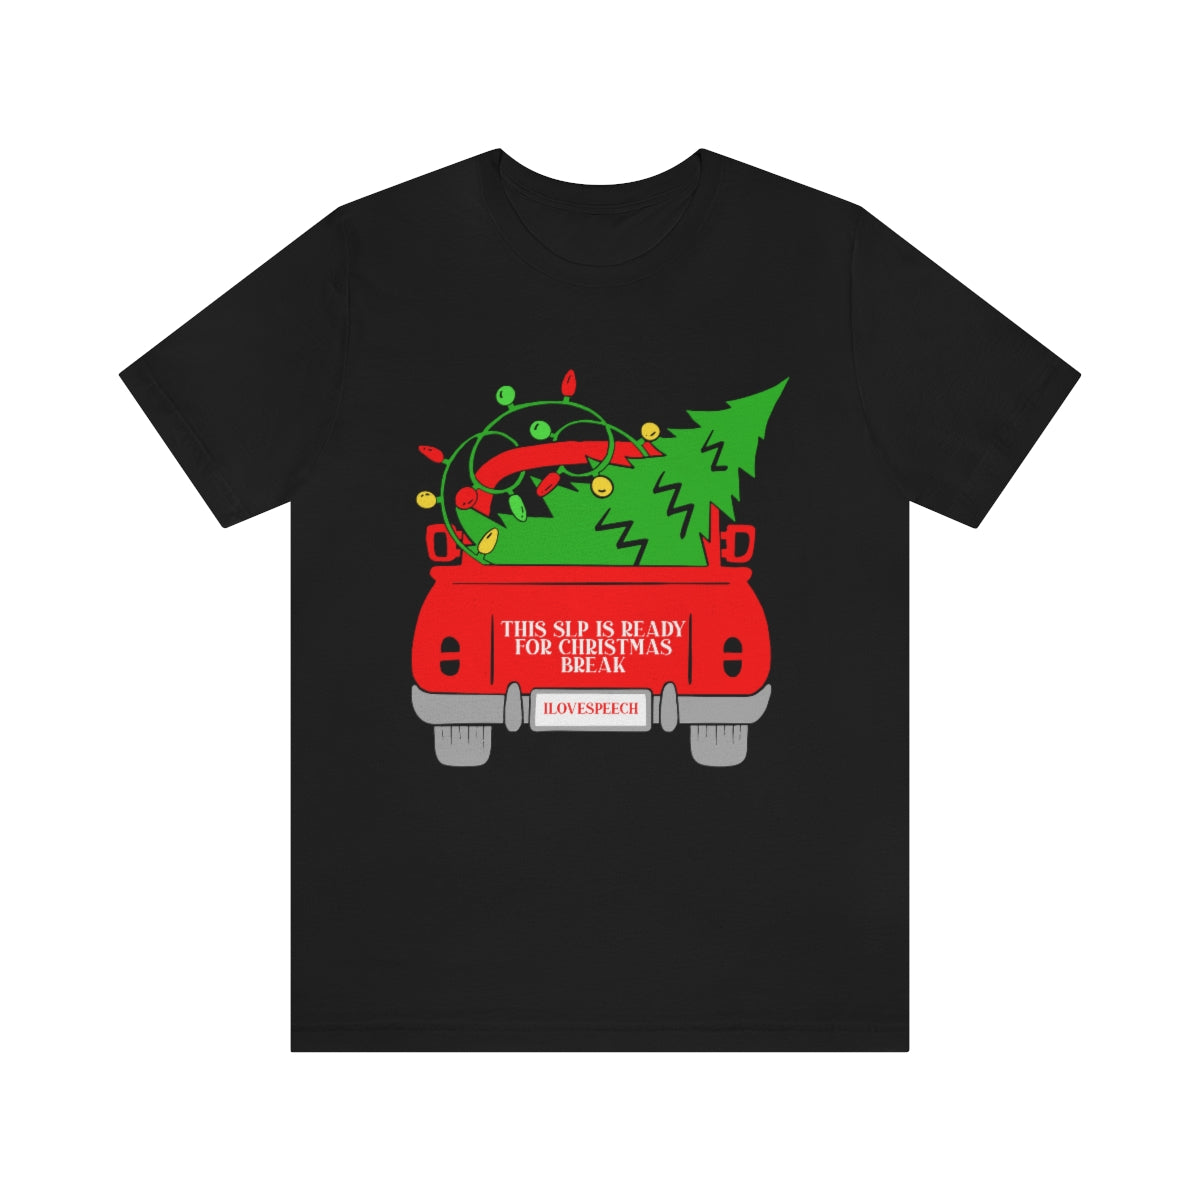 This SLP is Ready for Christmas Break Tee